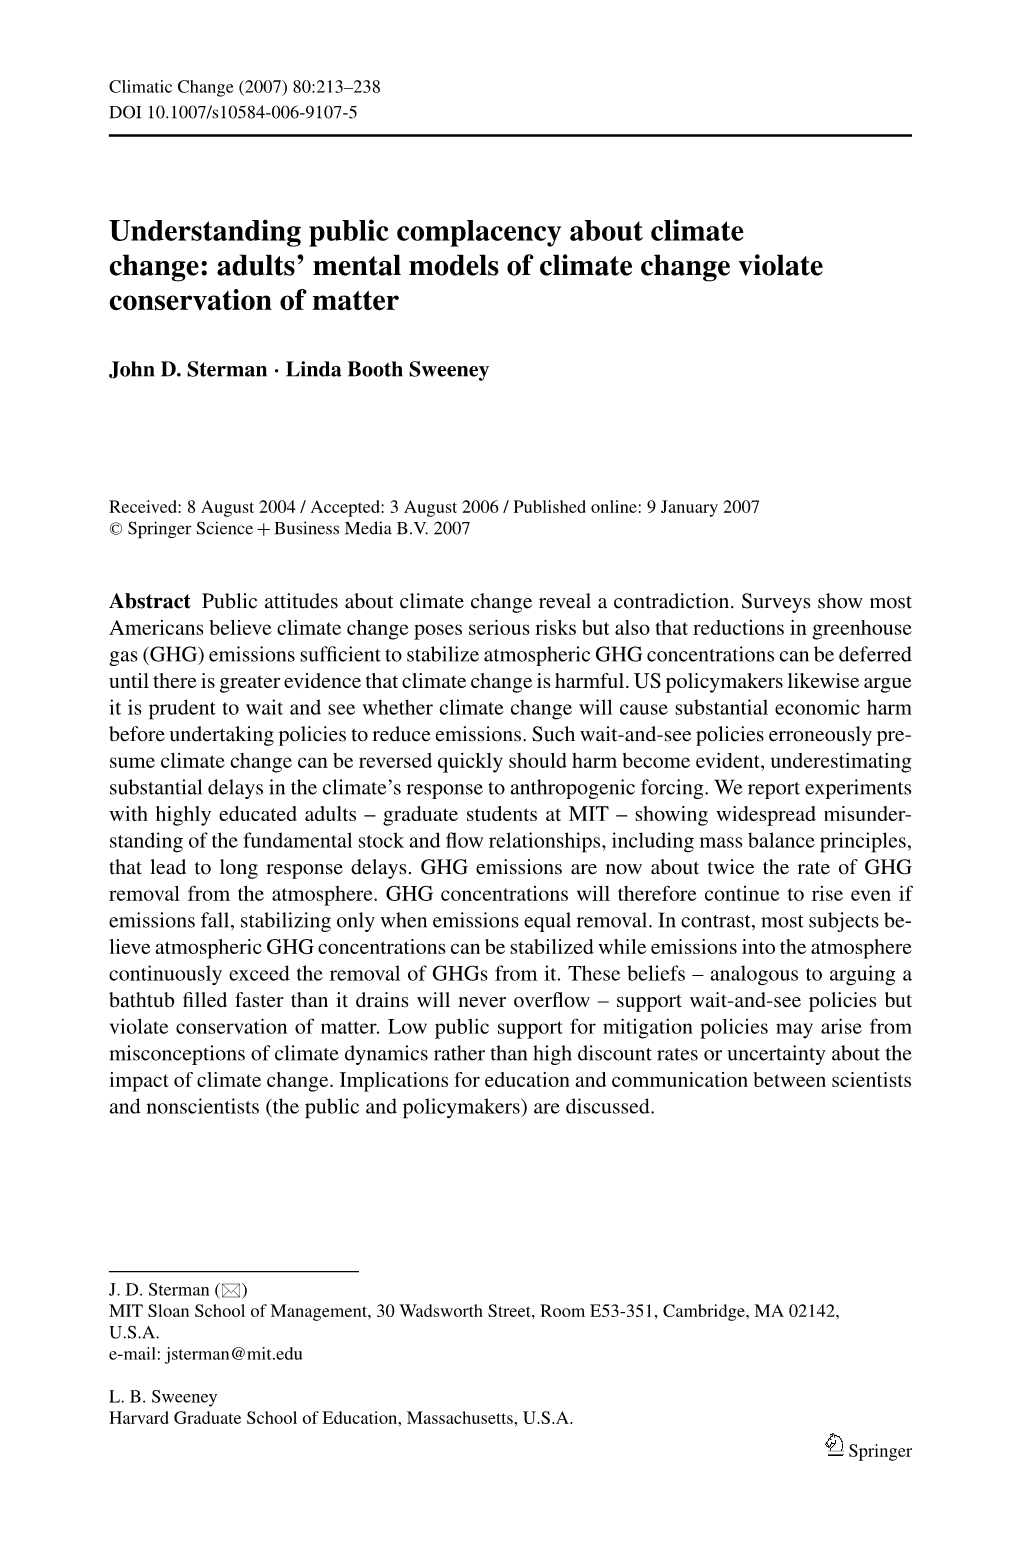 Understanding Public Complacency About Climate Change: Adults’ Mental Models of Climate Change Violate Conservation of Matter